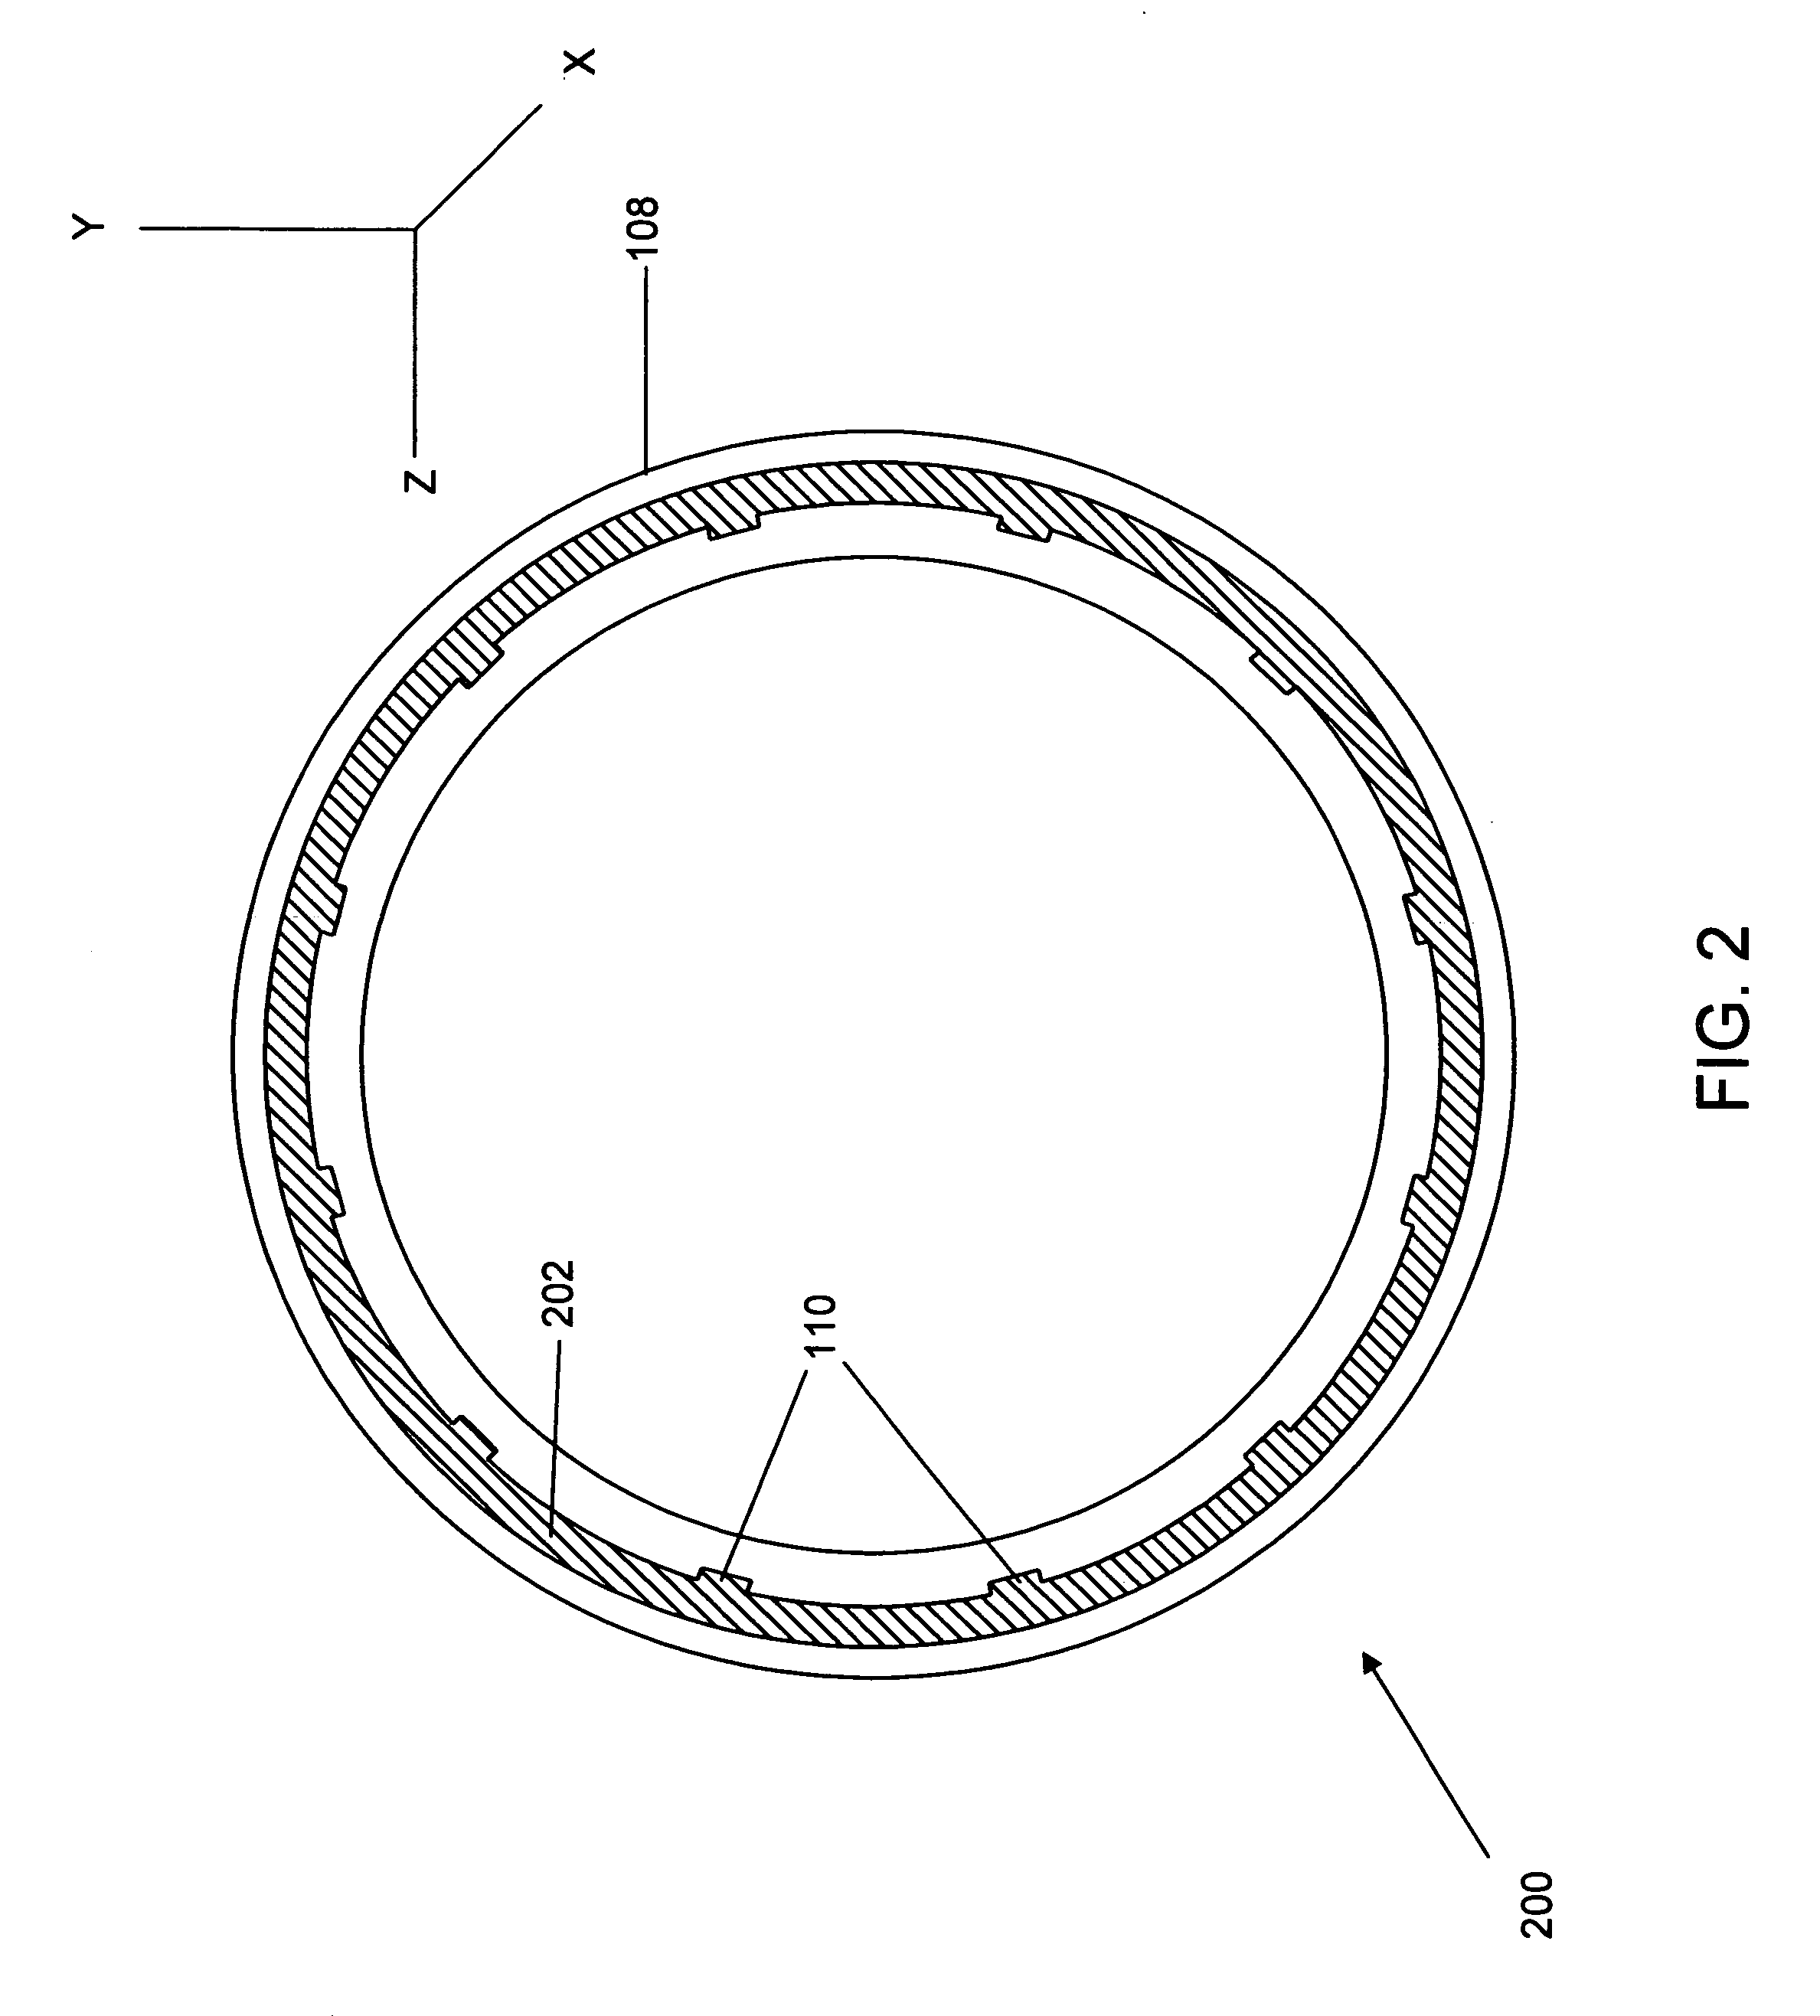 Method and apparatus for cleaning of a CVD reactor